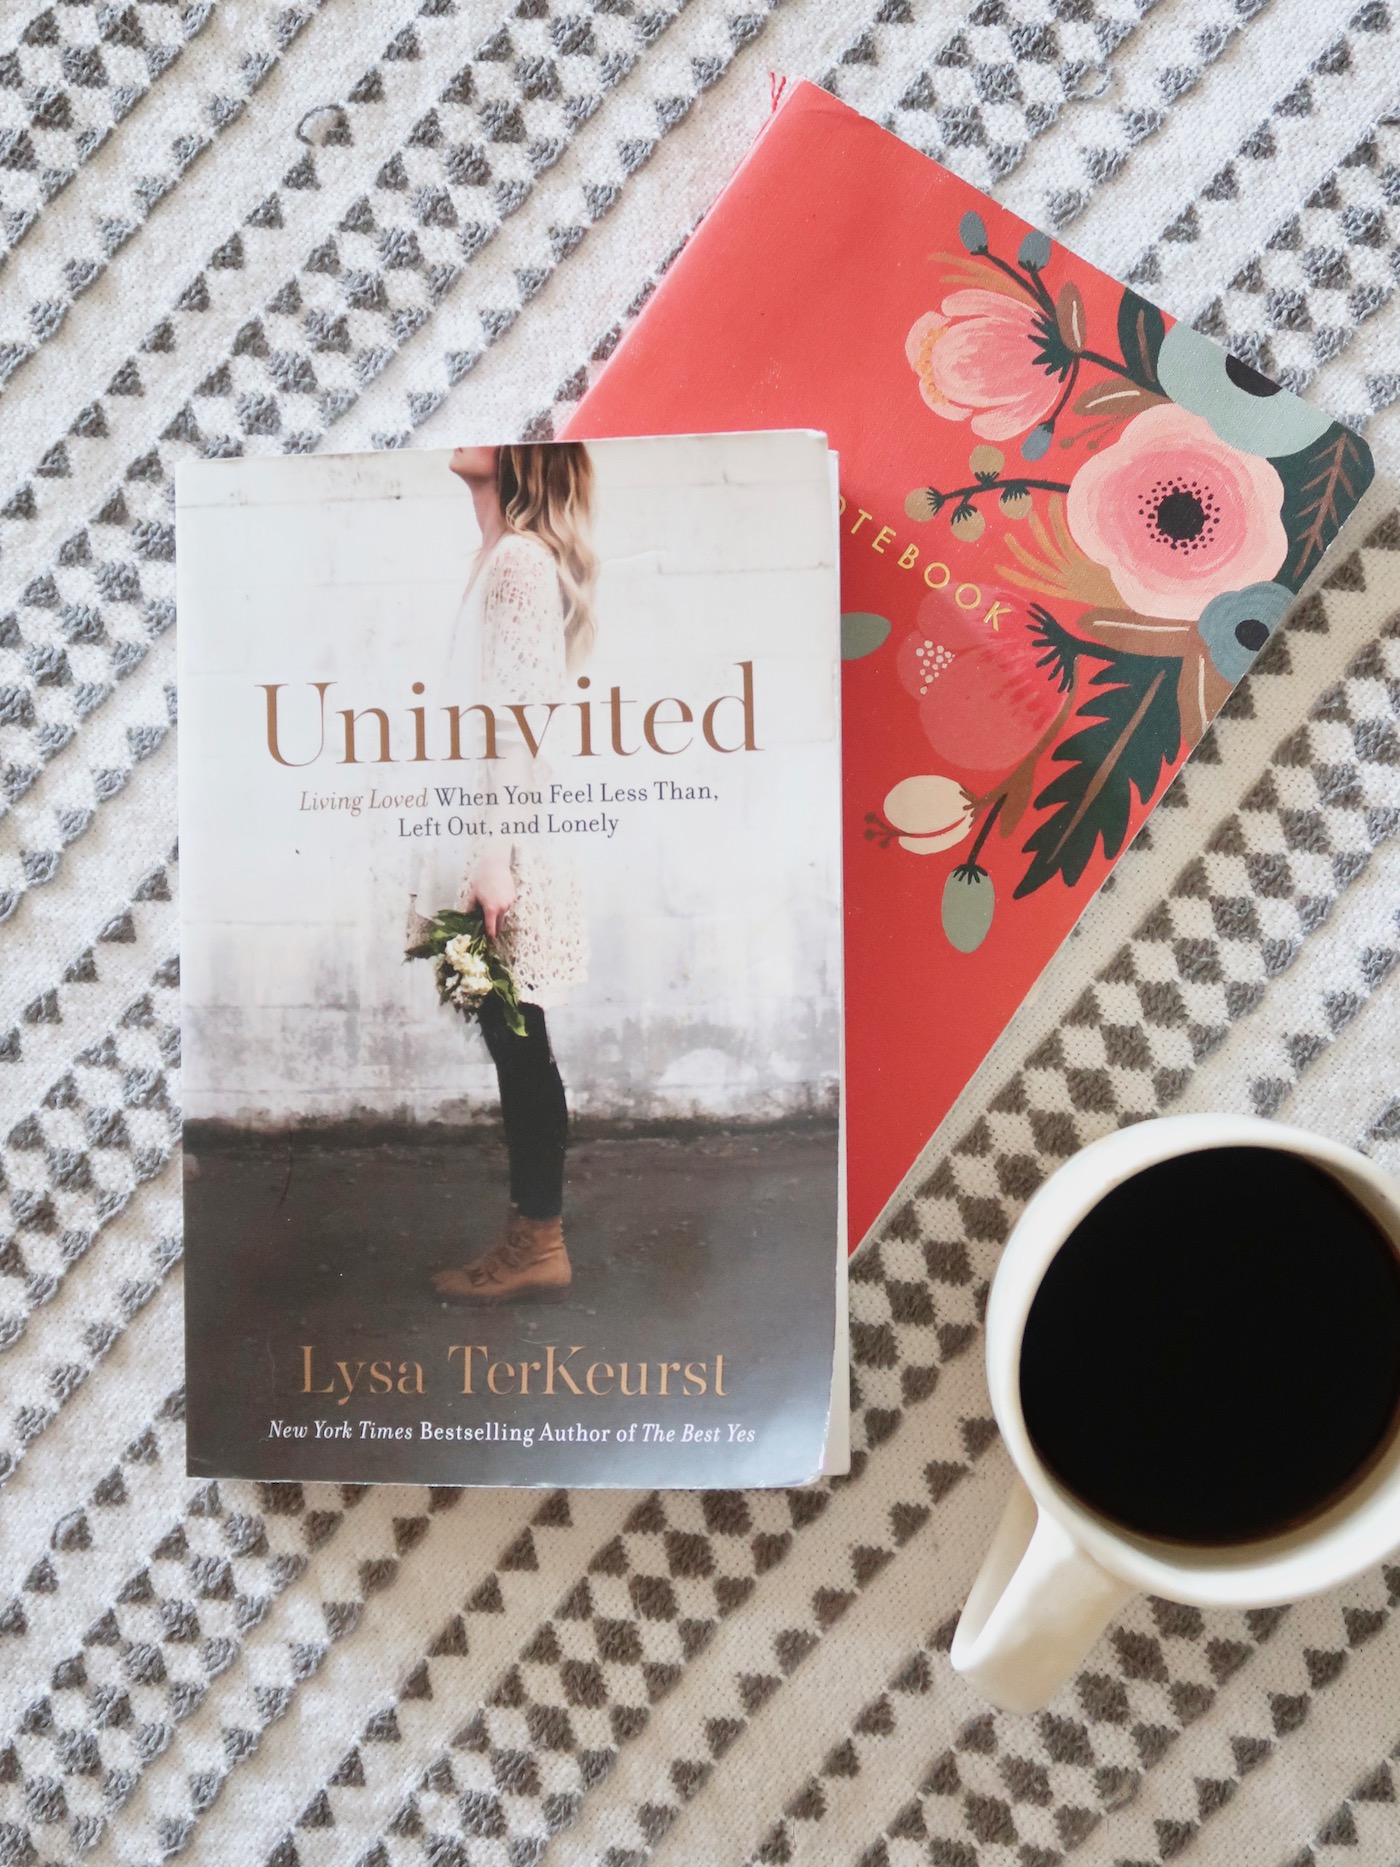 Uninvited by Lysa Terkeurst. Highly recommend! // www.thehiveblog.com